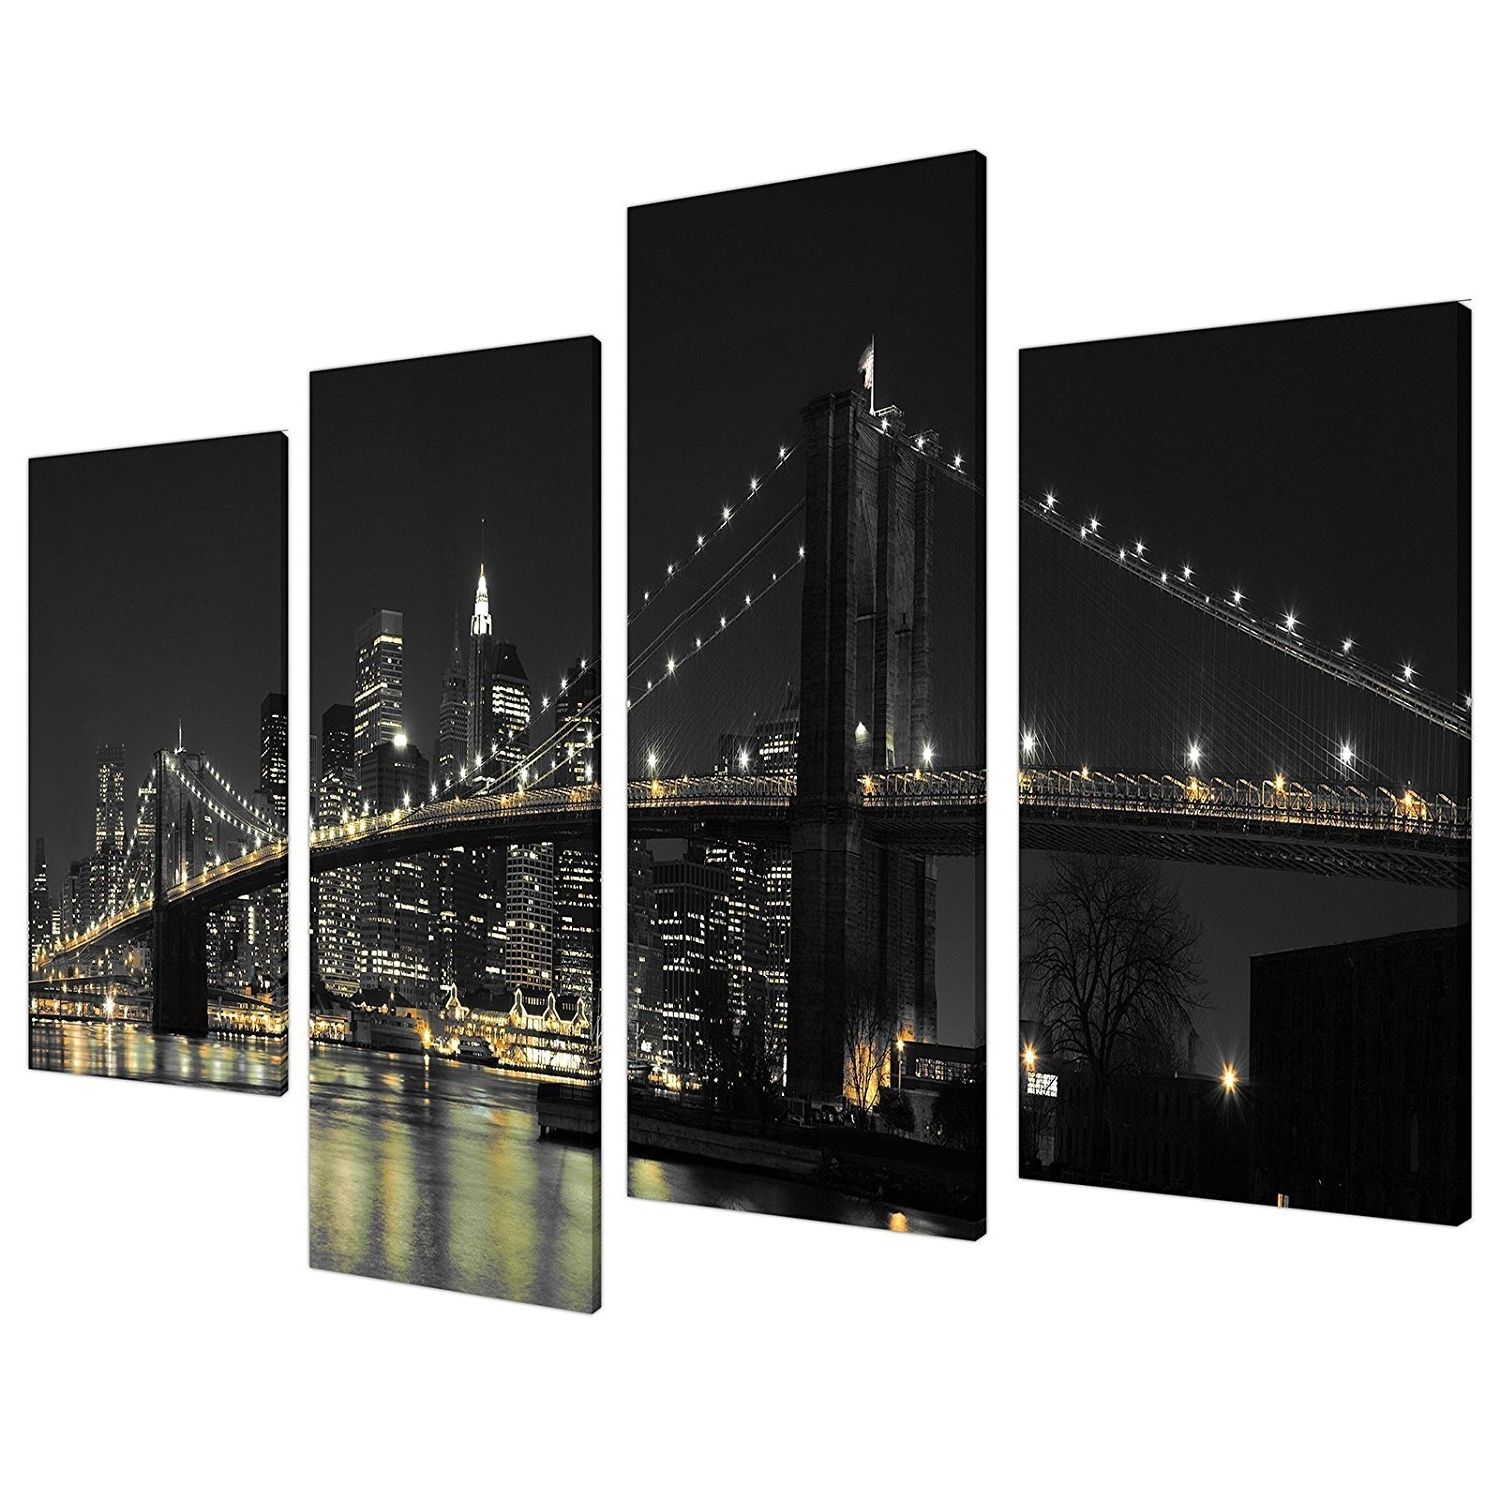 Well Known Large White Wall Art Regarding Amazon: Large New York City Canvas Wall Art Pictures Of Nyc (View 11 of 15)